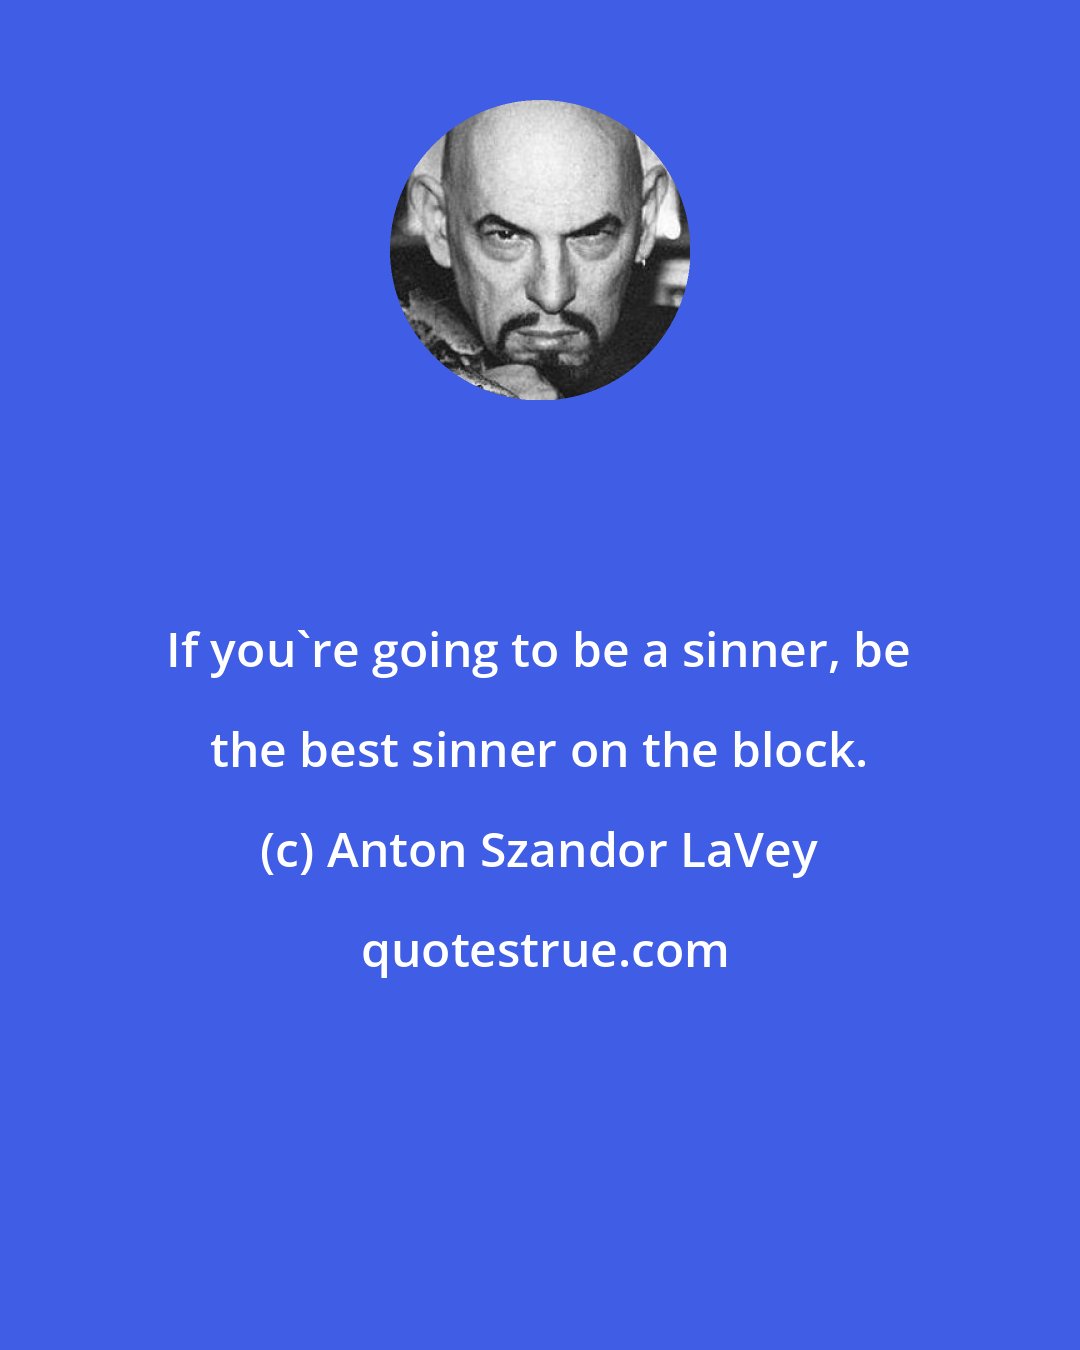 Anton Szandor LaVey: If you're going to be a sinner, be the best sinner on the block.